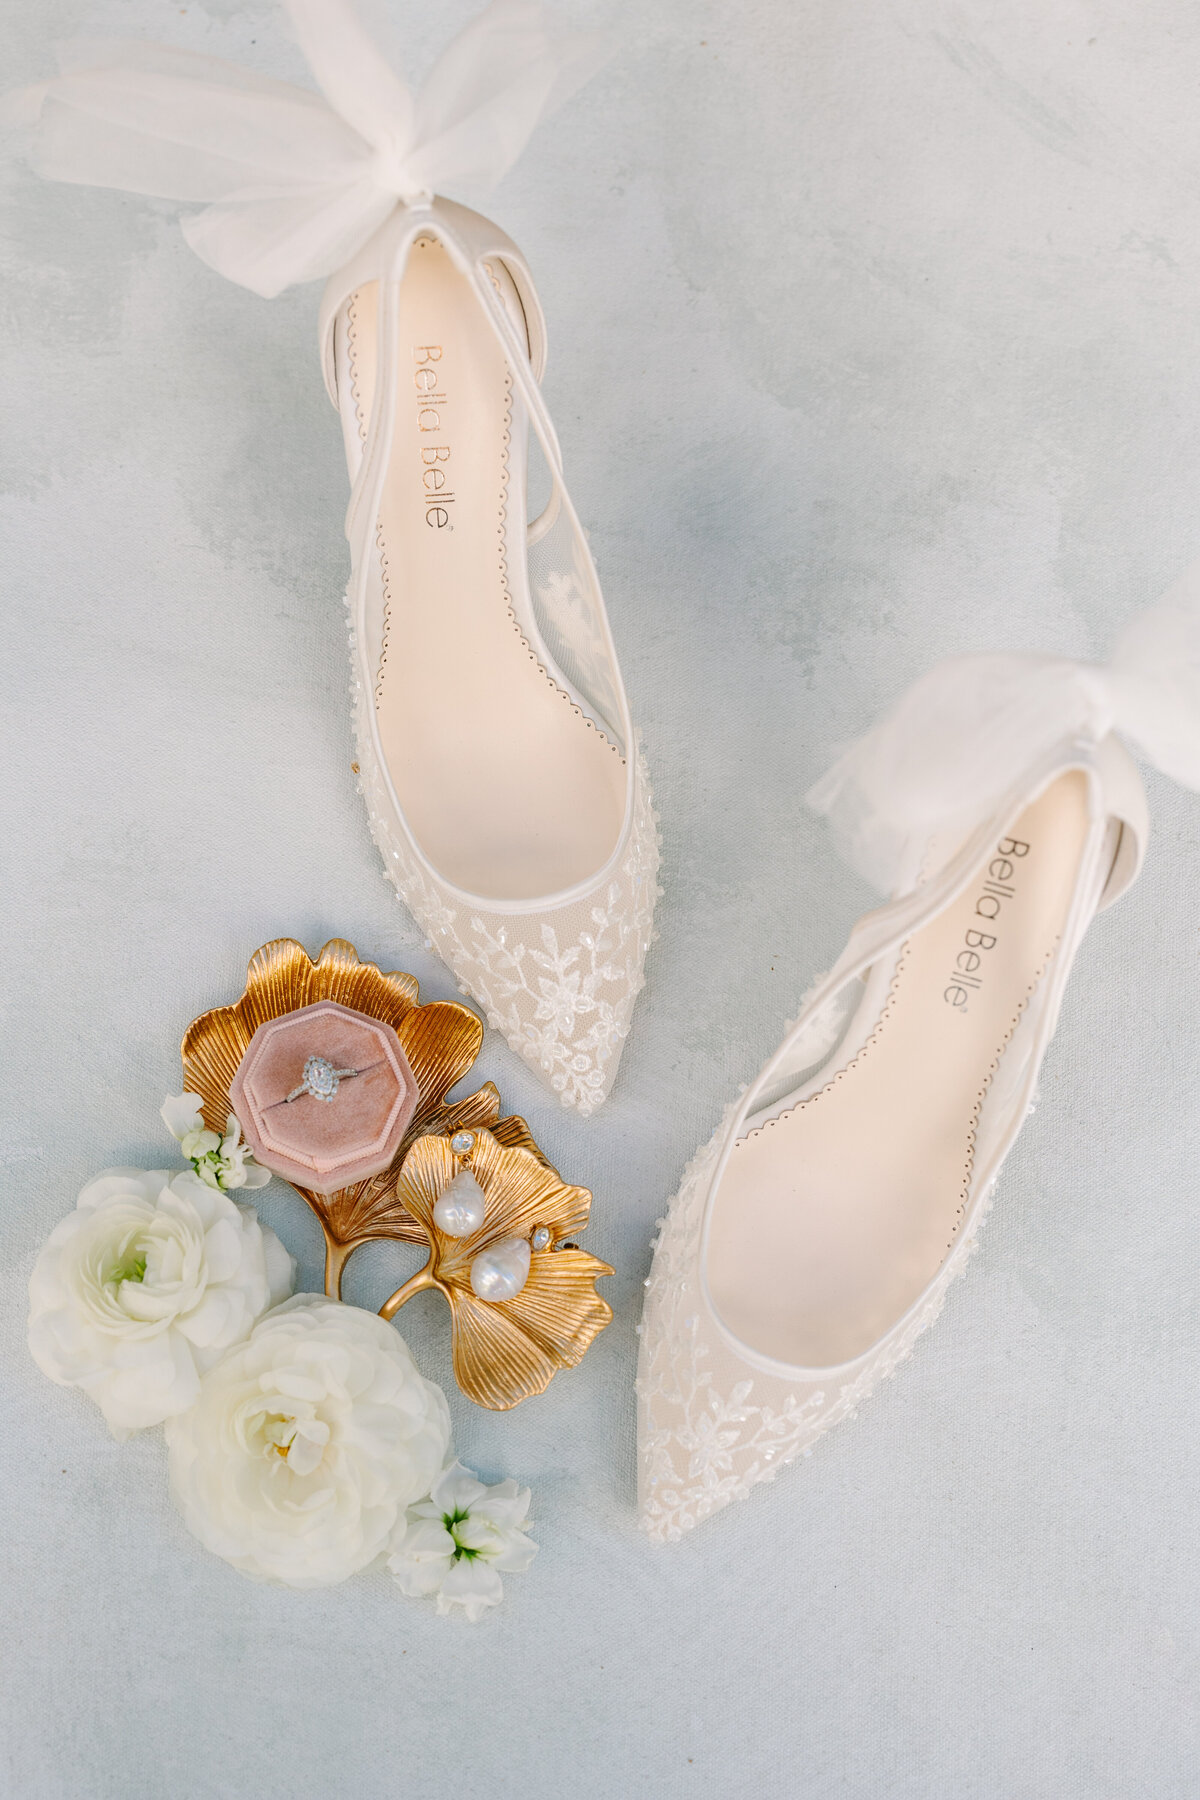 flat lay image of bride shoes, jewelry, and flowers.